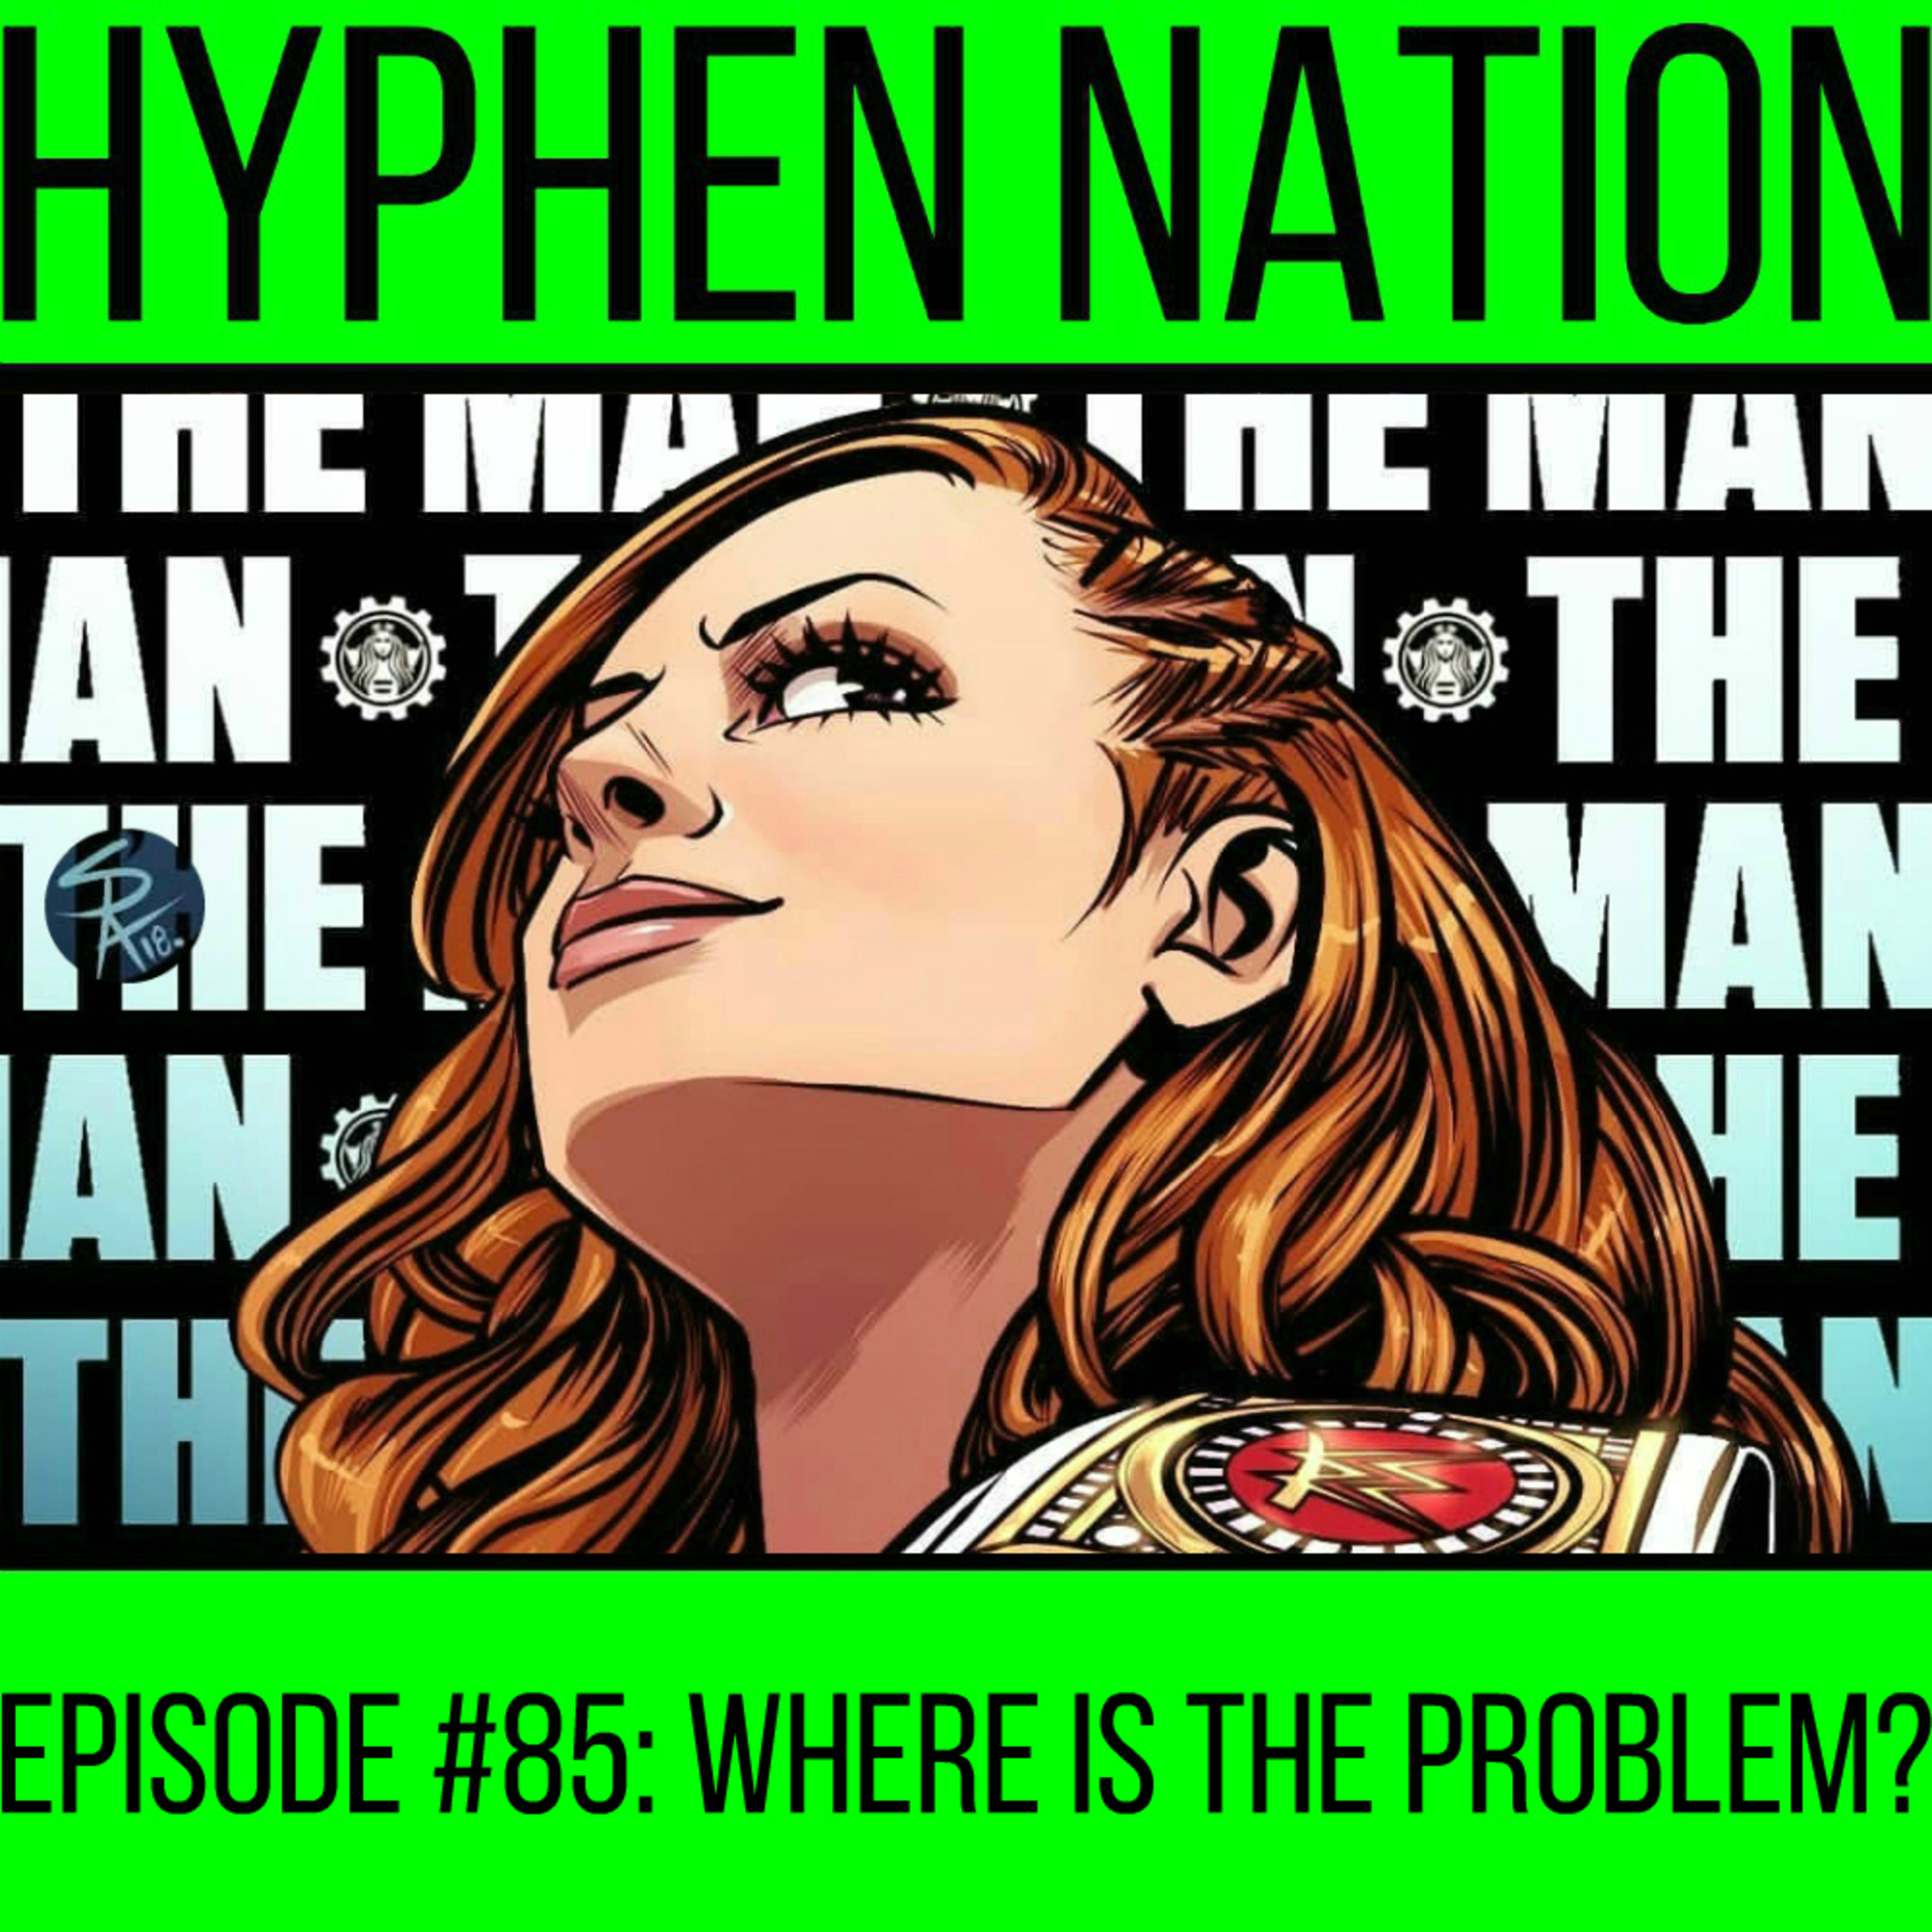 Episode #85: Where Is The Problem?